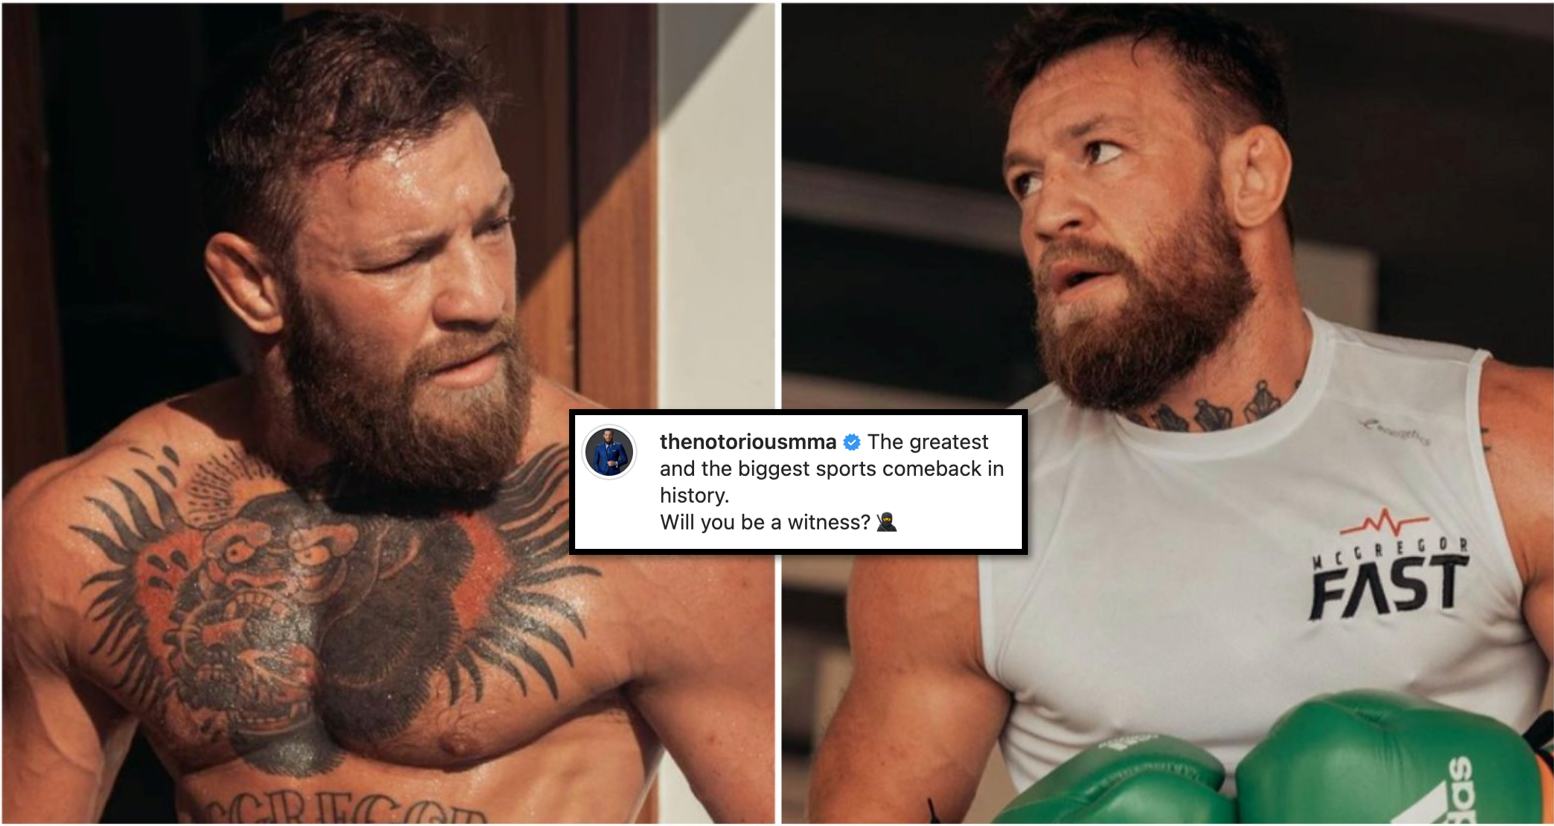 Conor McGregor is in unreal shape as he eyes 'greatest & biggest sporting comeback'